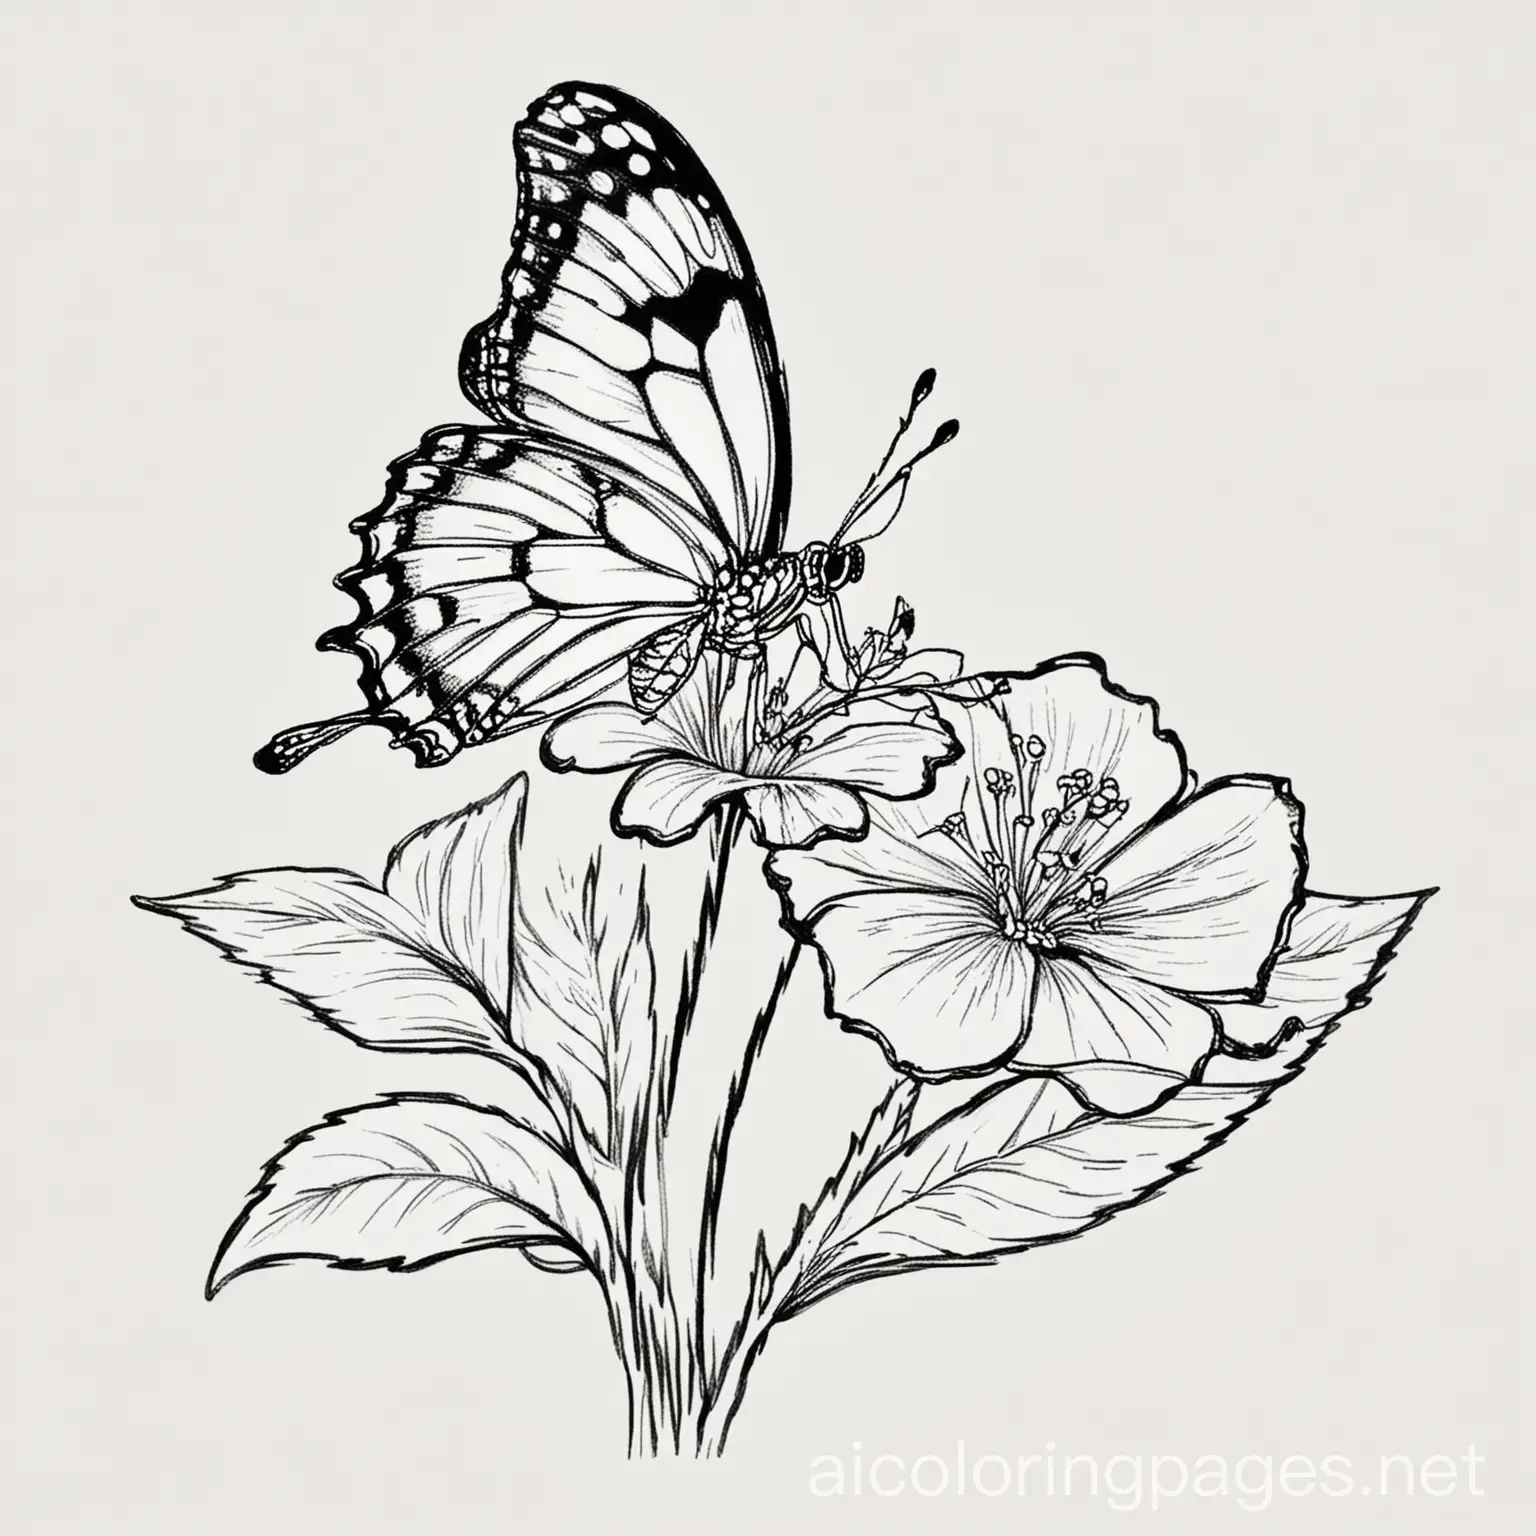 butterfly drinking from a flower, Coloring Page, black and white, line art, white background, Simplicity, Ample White Space. The background of the coloring page is plain white to make it easy for young children to color within the lines. The outlines of all the subjects are easy to distinguish, making it simple for kids to color without too much difficulty